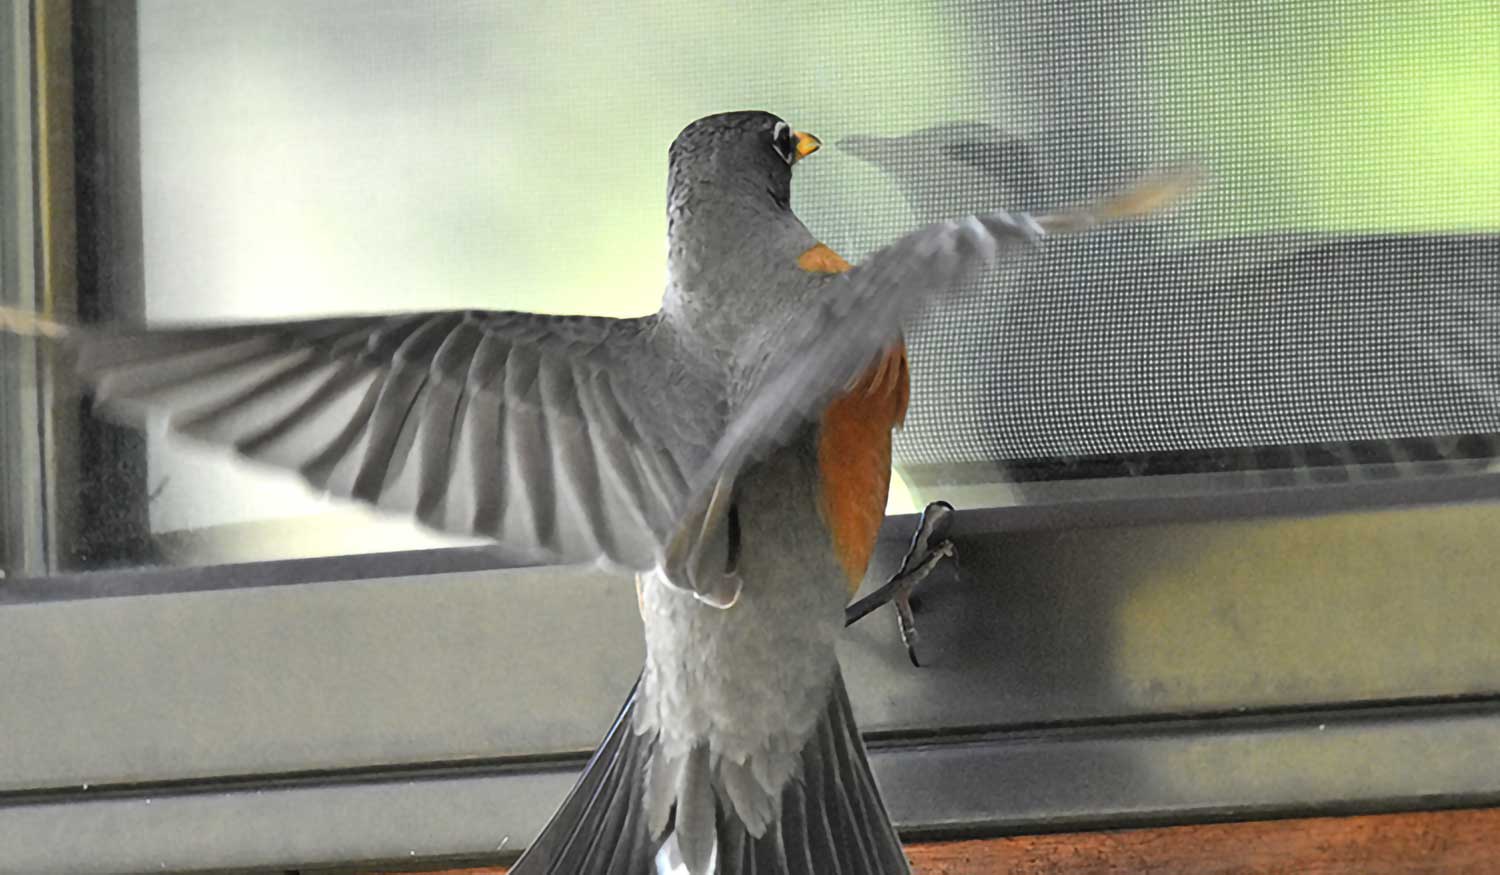 Ever wonder why a bird will fly right into a window when said window is obviously closed? Perhaps it is trying to get to a better place. Are we as humans all that different?